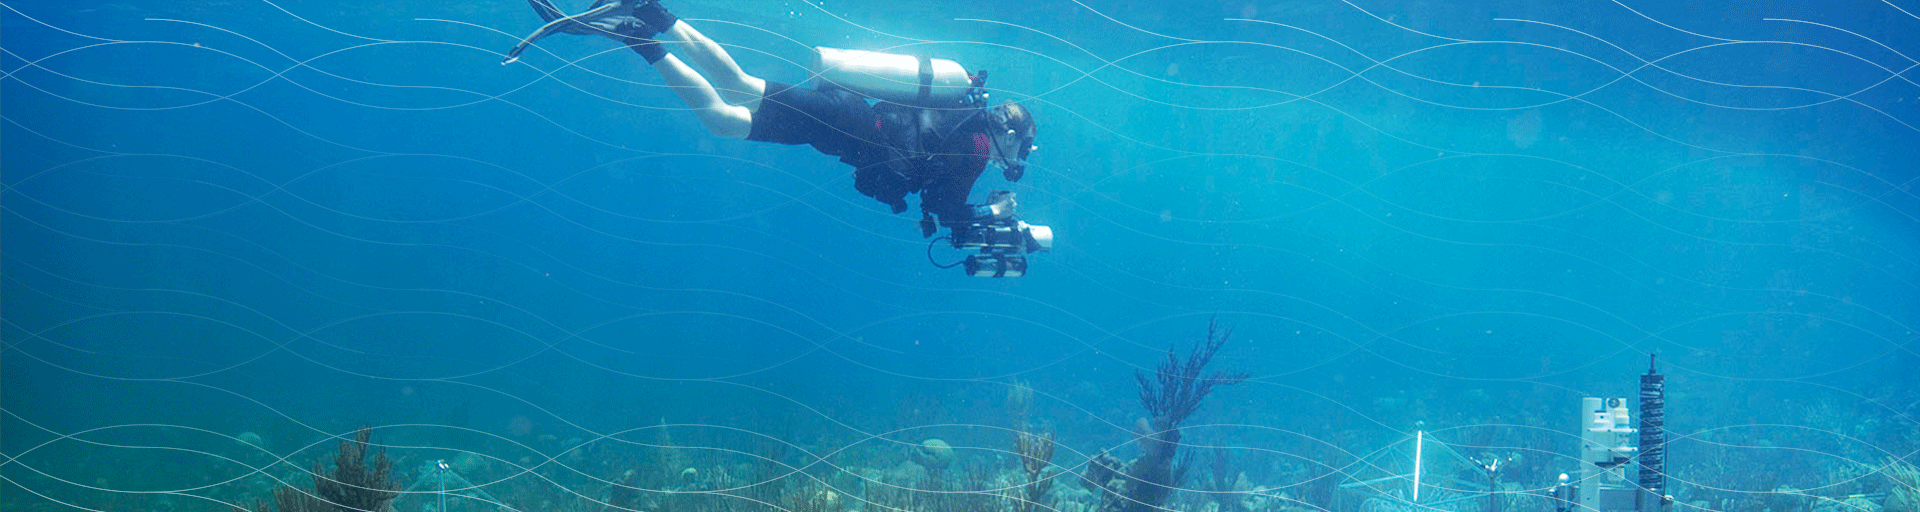 
		Researcher scuba diving in vibrant blue water with coral reefs visible below		